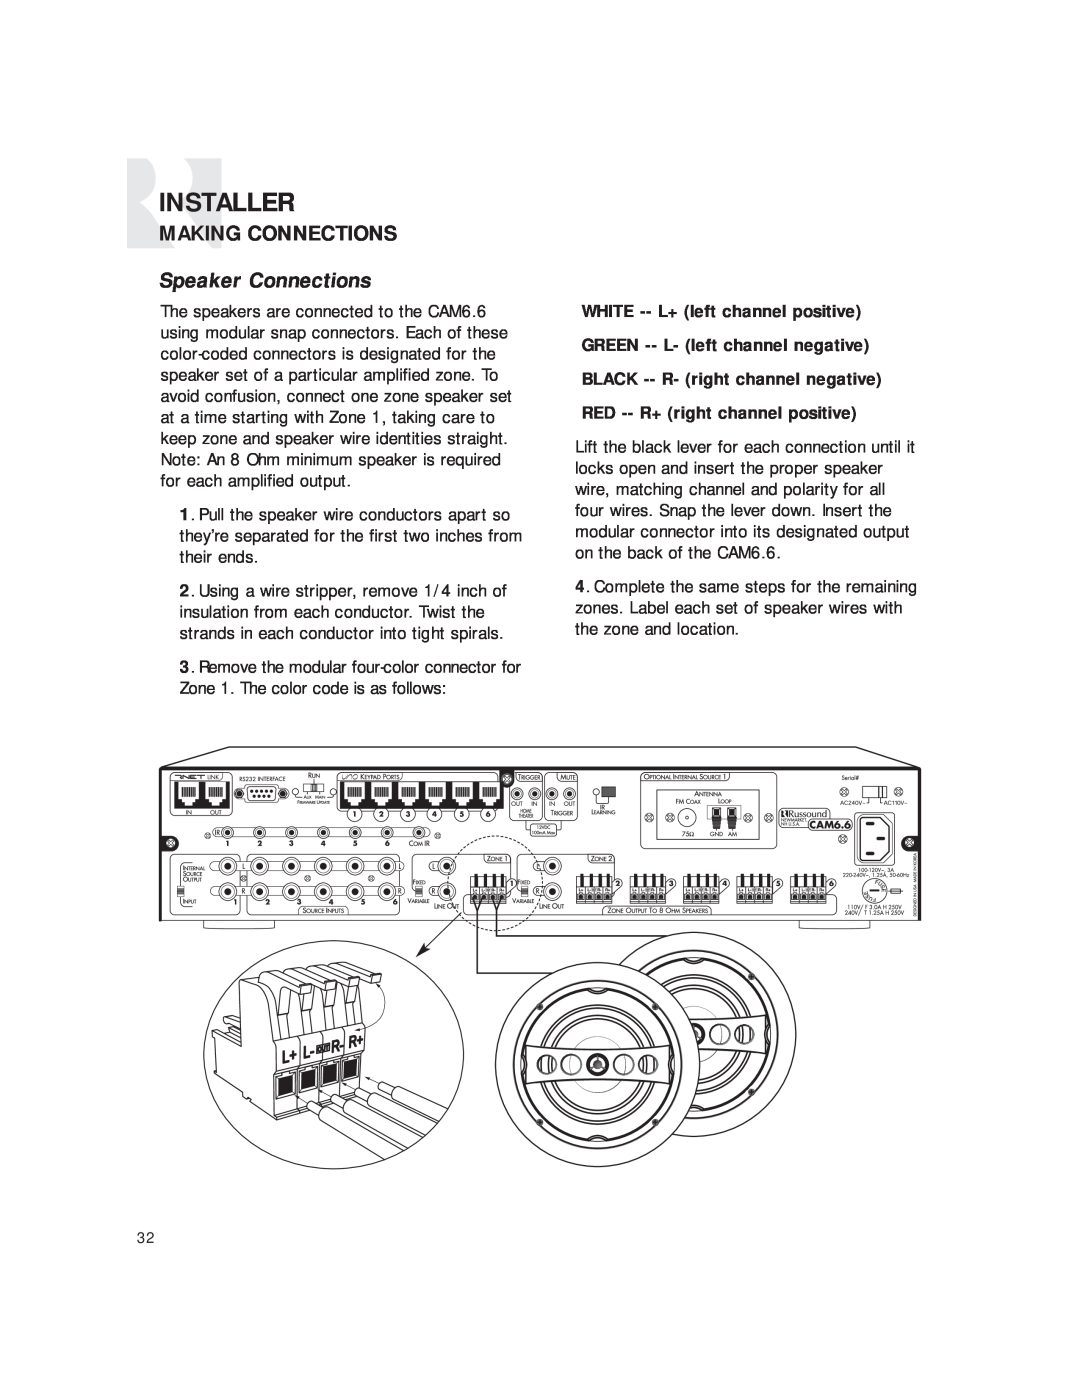 Russound CAM6.6T-S1 instruction manual Speaker Connections, Installer, Making Connections 